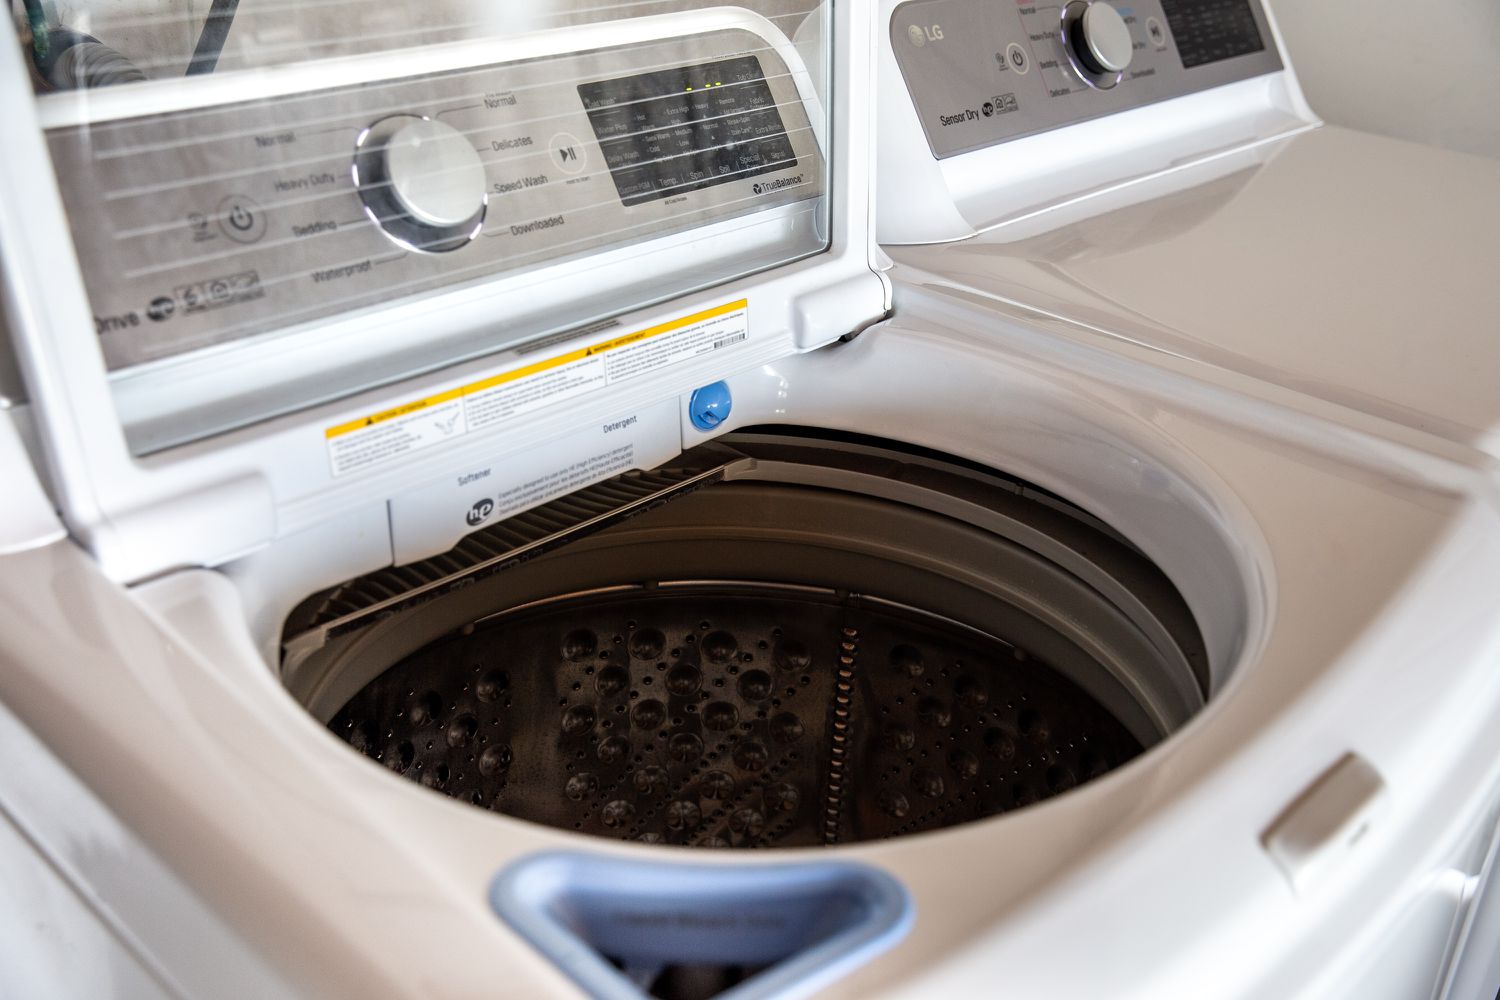 How To Open The Top Of A Washing Machine